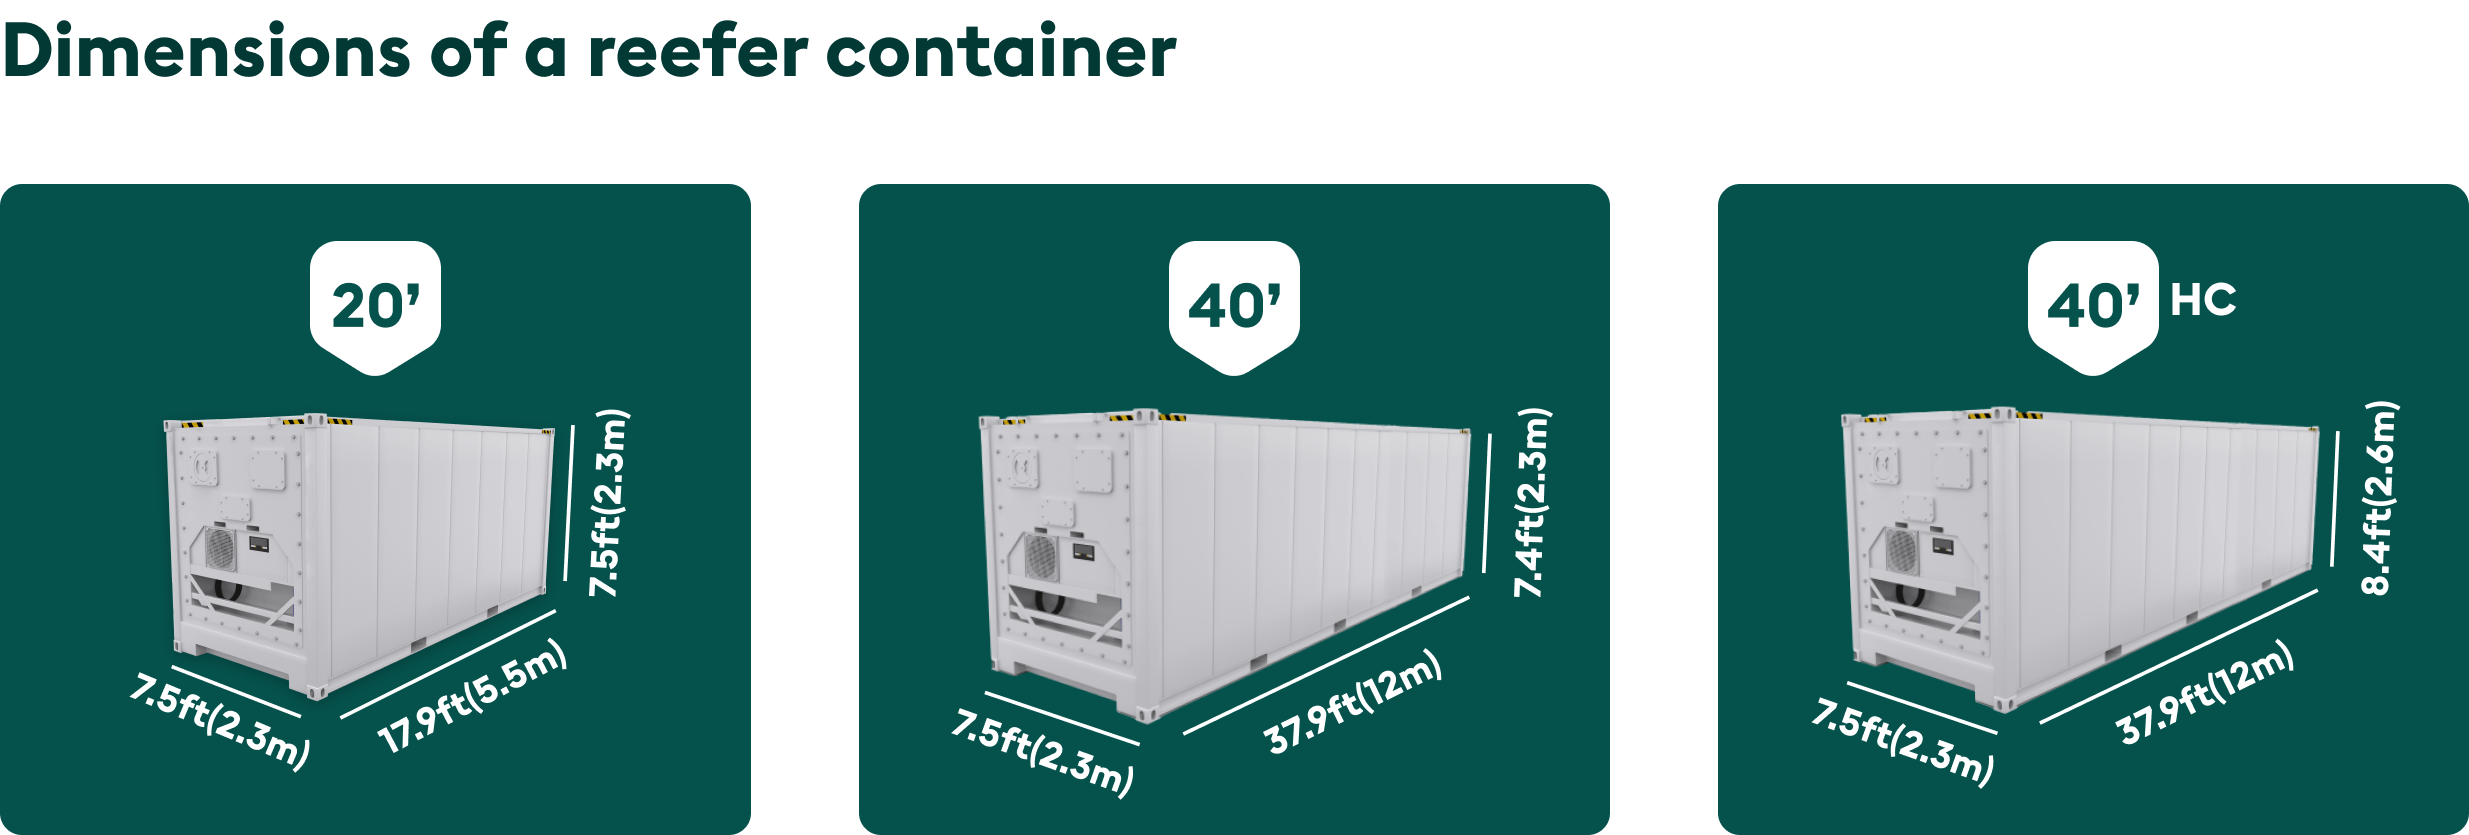 reefer container 